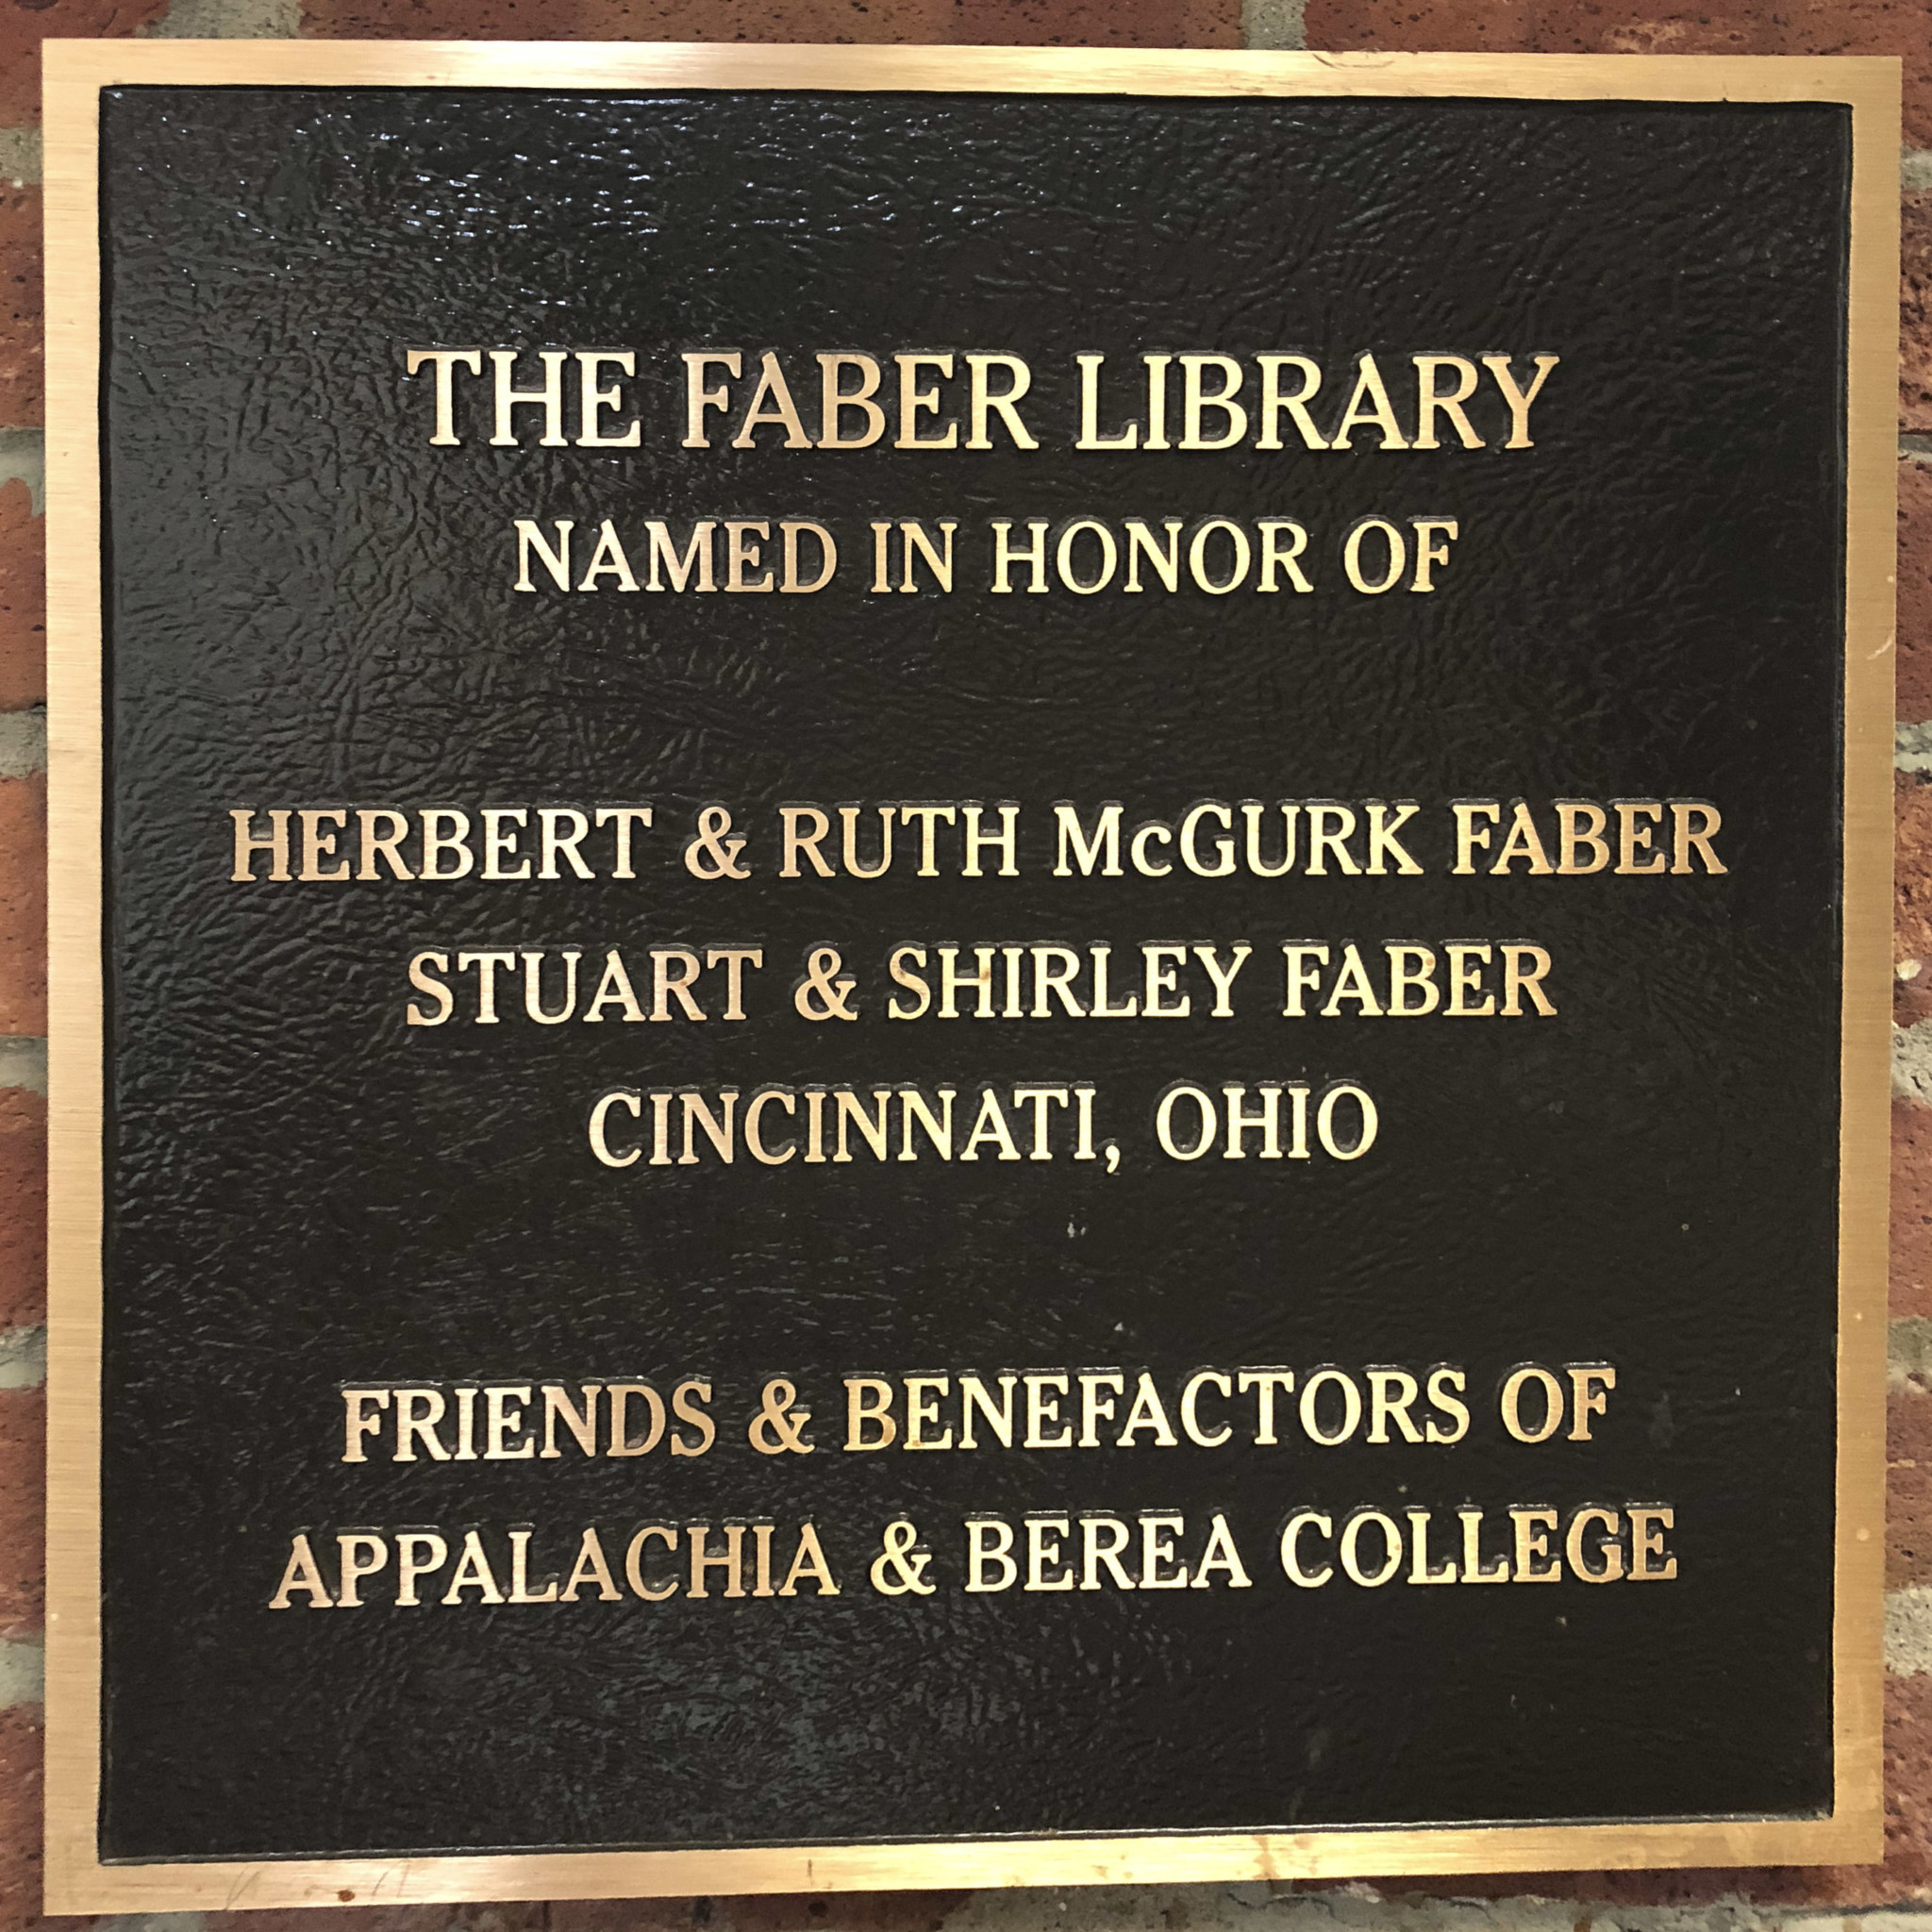 Plaque naming Faber Library for Herbert & Ruther McGurk Faber, Stuart & Shirly Faber, Cincinnati, Ohio; Friends & Benefactors of Appalachia and Berea College